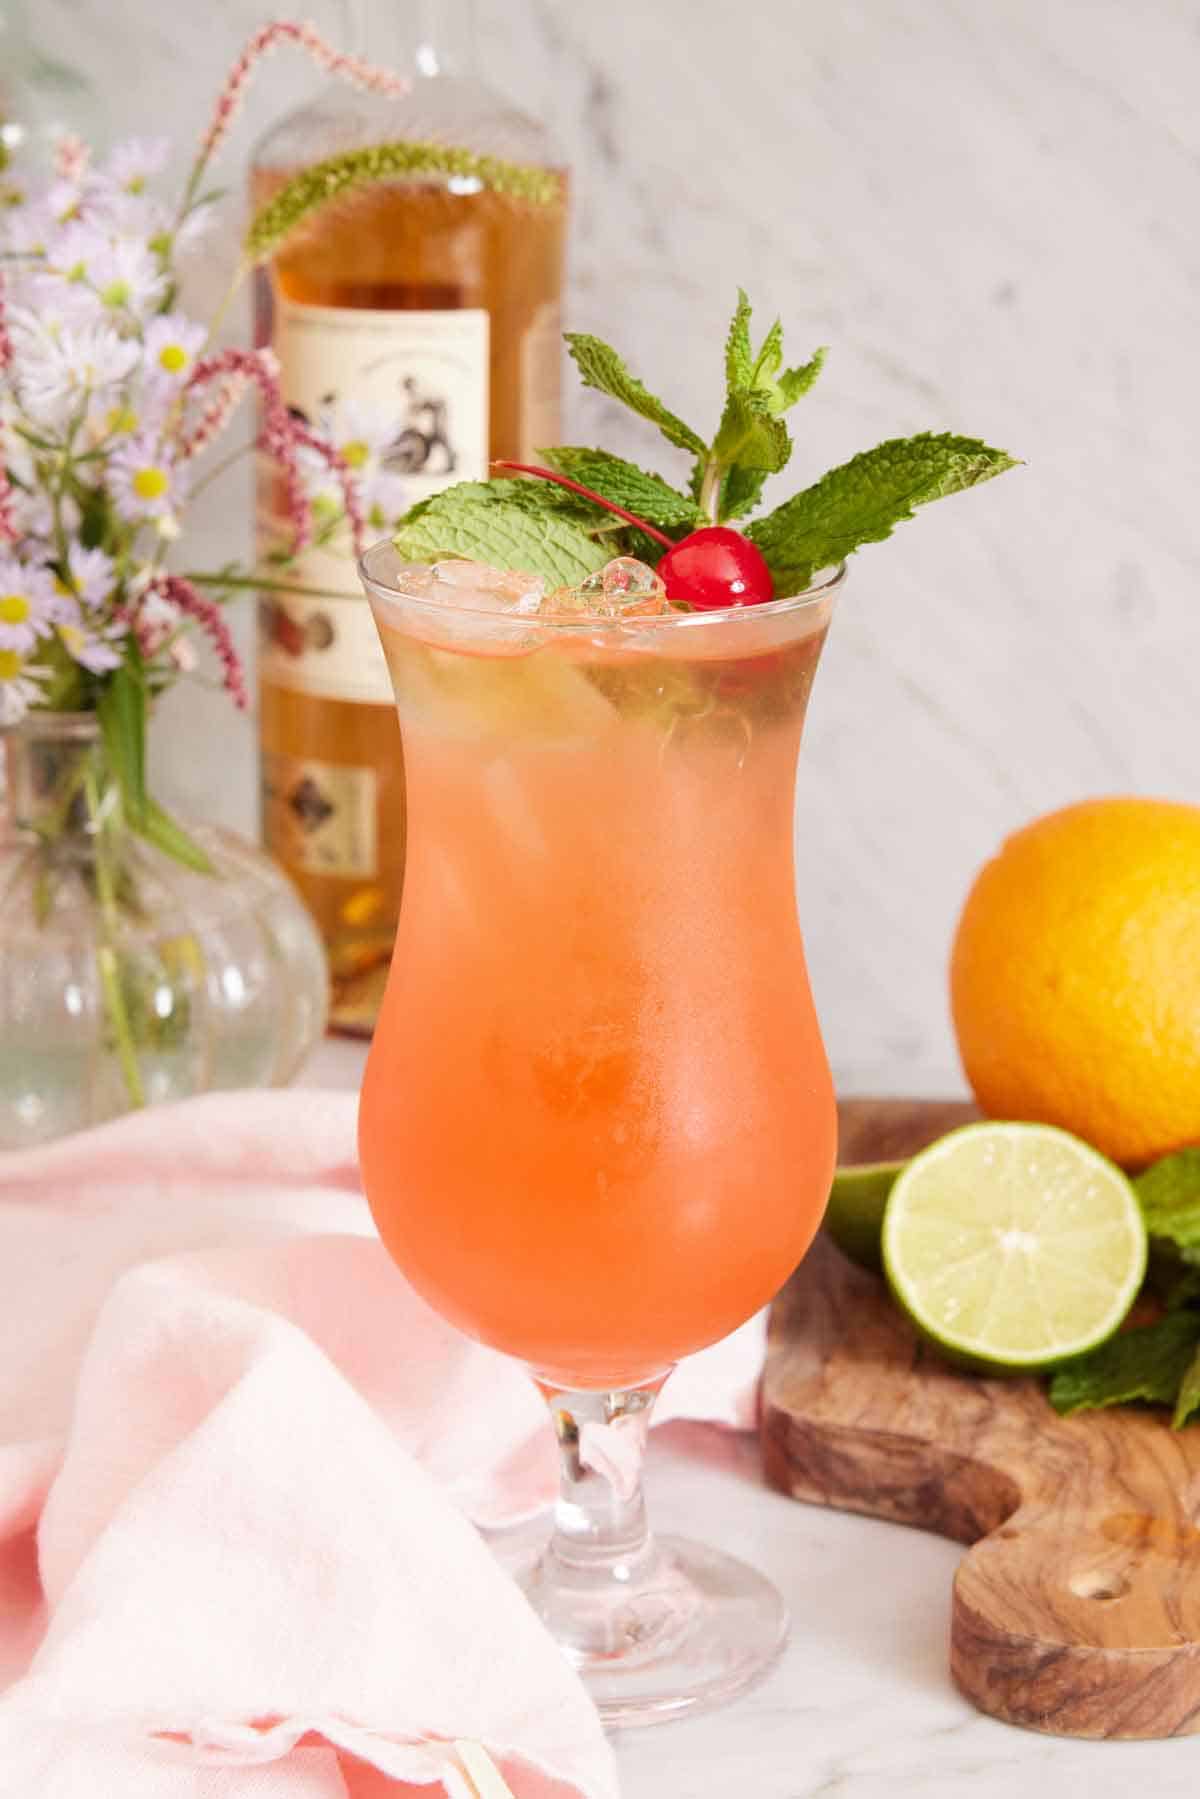 A glass of zombie cocktail garnished with mint leaves and a maraschino cherry. Cut lime and an orange on a cutting board beside it and flowers in the background with a bottle of rum.